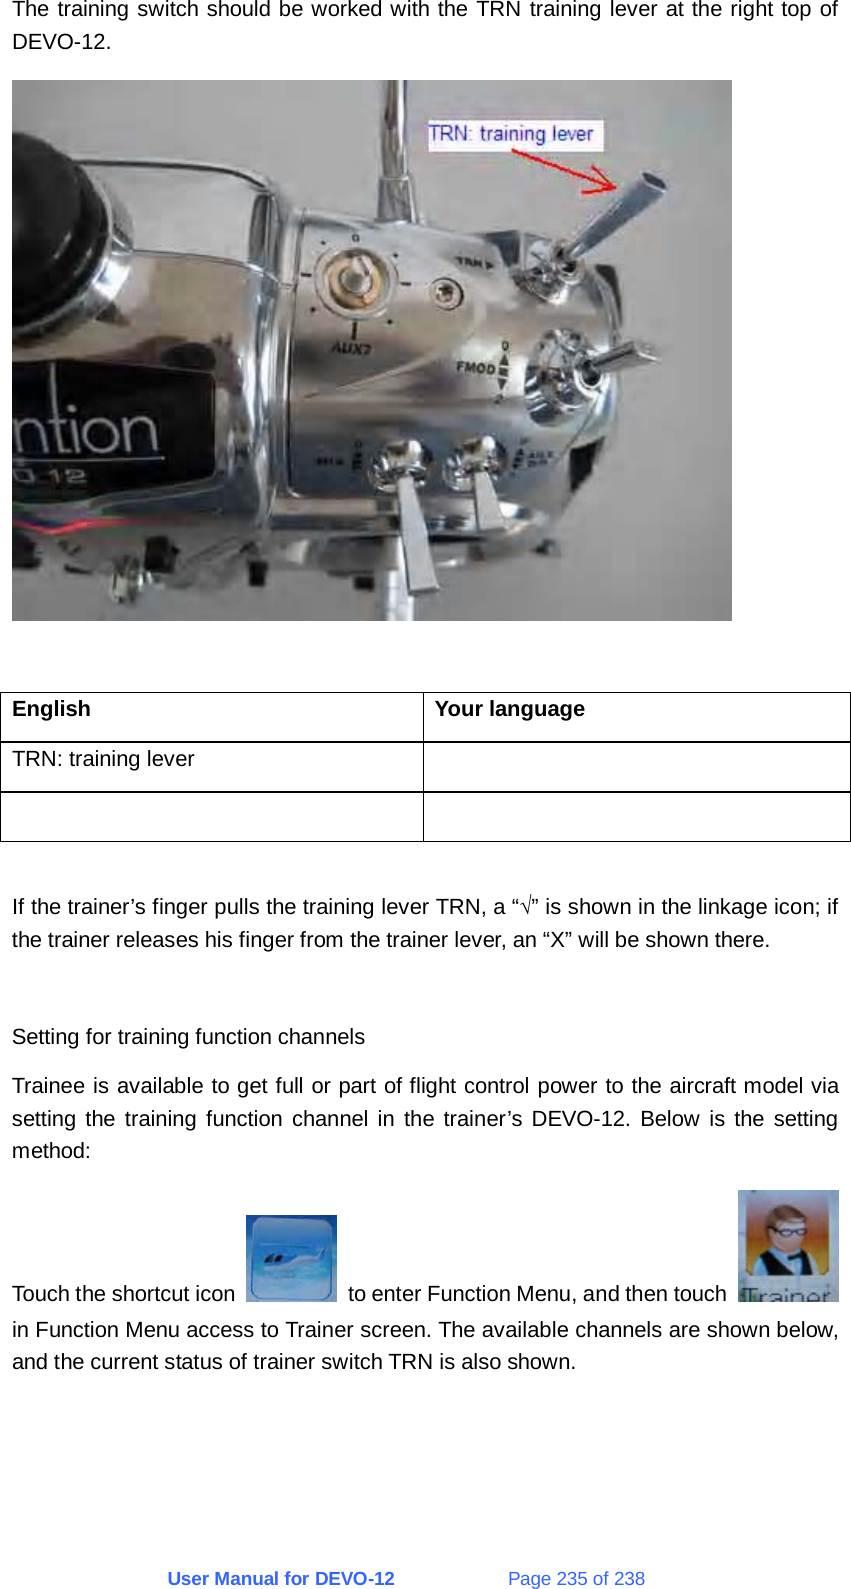 User Manual for DEVO-12             Page 235 of 238 The training switch should be worked with the TRN training lever at the right top of DEVO-12.   English Your language TRN: training lever      If the trainer’s finger pulls the training lever TRN, a “√” is shown in the linkage icon; if the trainer releases his finger from the trainer lever, an “X” will be shown there.  Setting for training function channels Trainee is available to get full or part of flight control power to the aircraft model via setting the training function channel in the trainer’s DEVO-12. Below is the setting method: Touch the shortcut icon    to enter Function Menu, and then touch   in Function Menu access to Trainer screen. The available channels are shown below, and the current status of trainer switch TRN is also shown.  